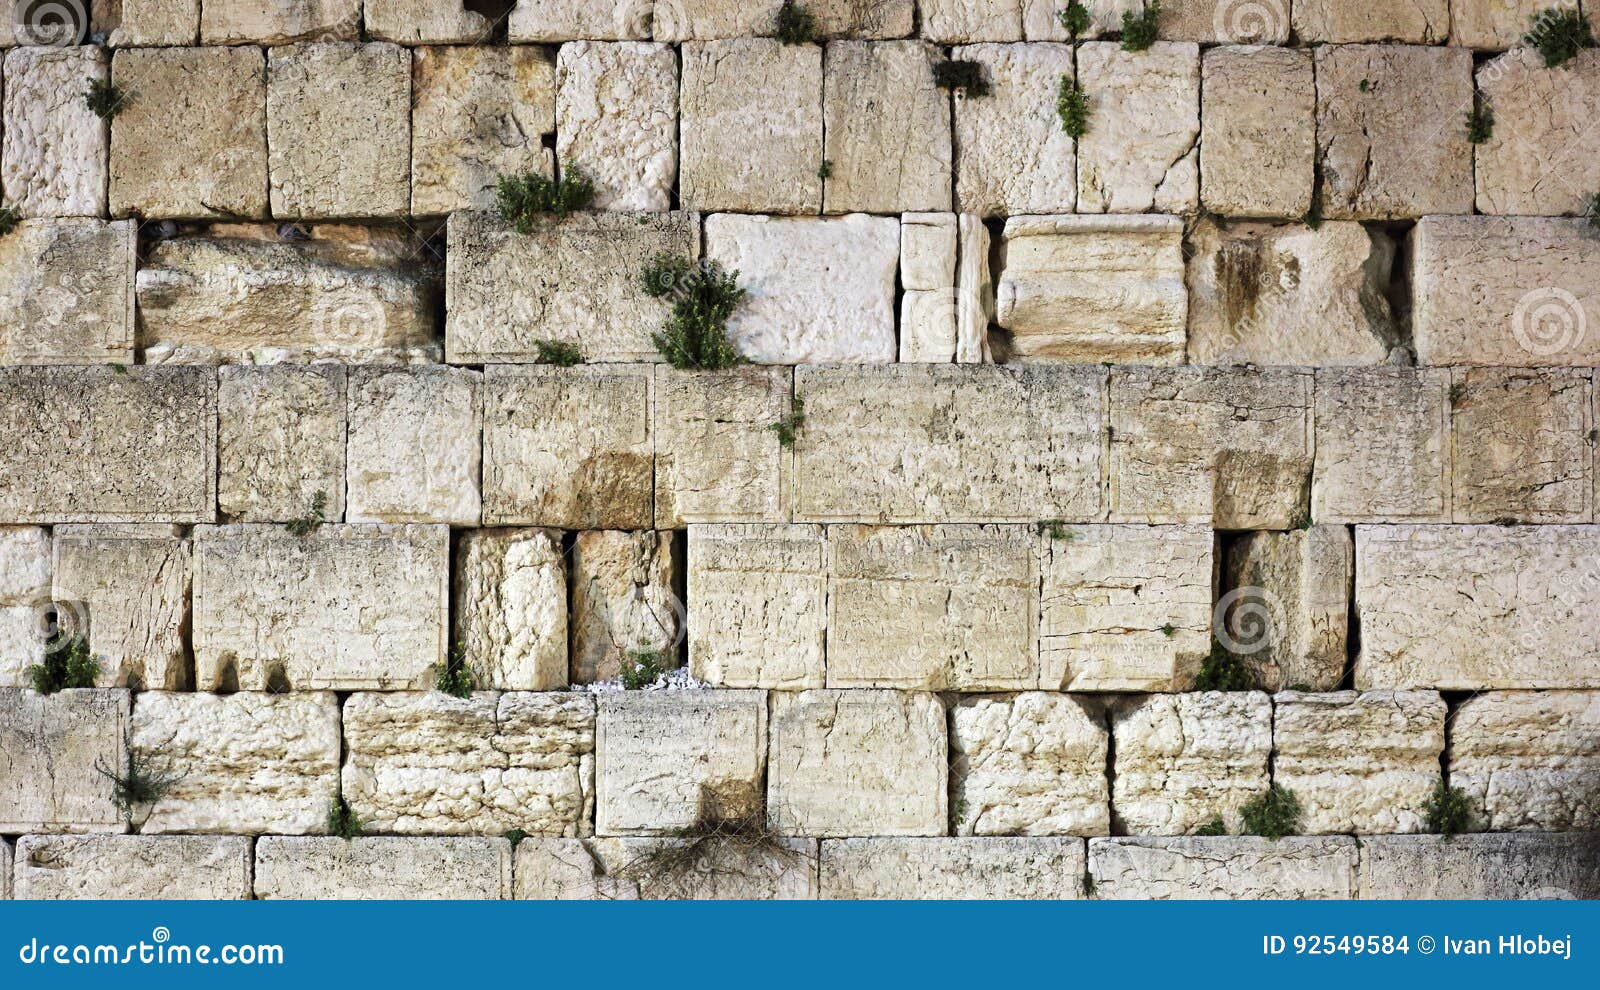 CSFOTO 10x8ft Western Wall Backdrop Jerusalem Judaism Wailing Wall Ruins Background for Photography Judaism Event Decor Banner Room Decor Wallpaper Audlts Photo Booth